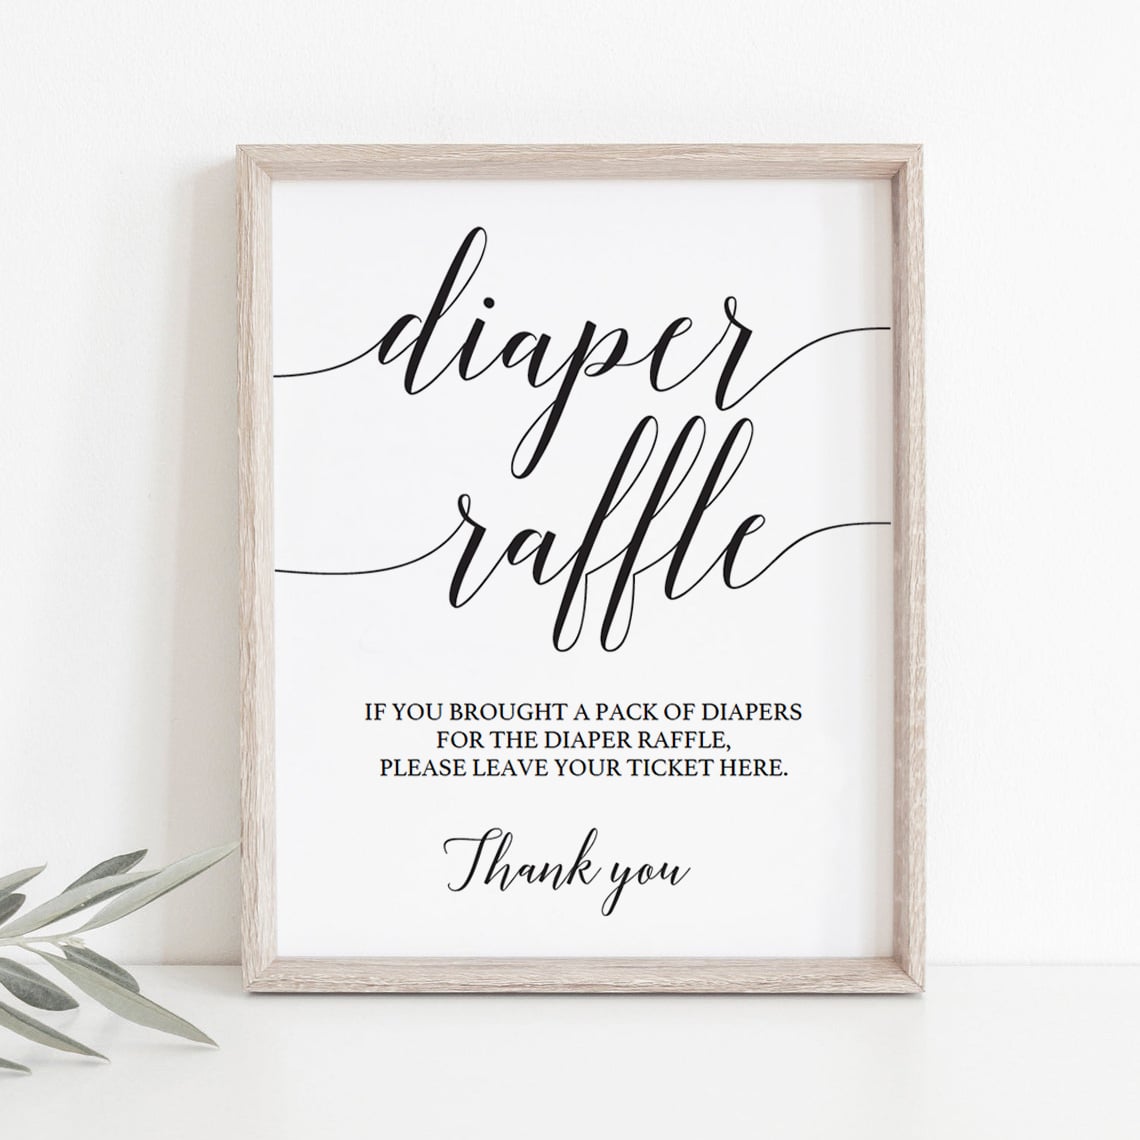 Diaper raffle sign template download by LittleSizzle